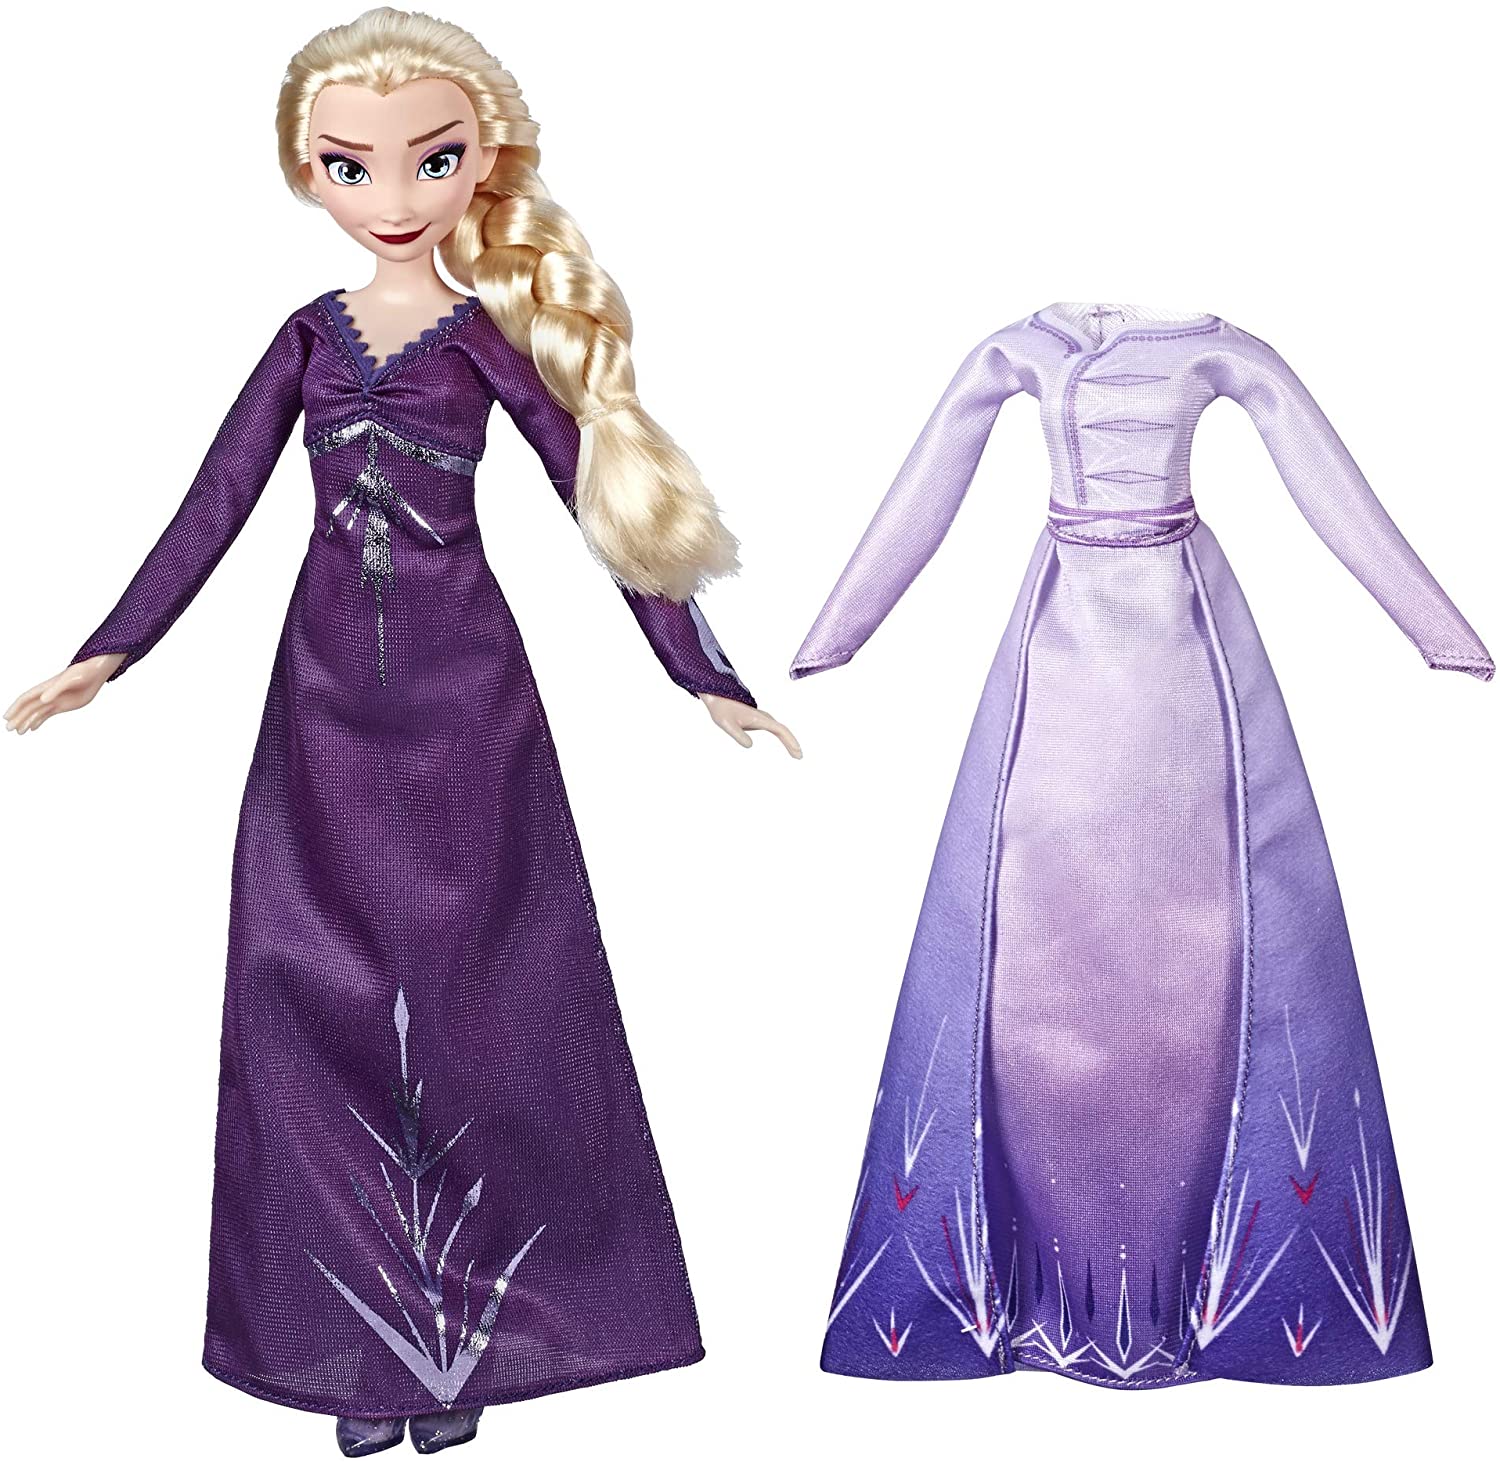 Disney Frozen Arendelle Clothes Dream Elsa Fashion Doll With 2 Outfits, Pur